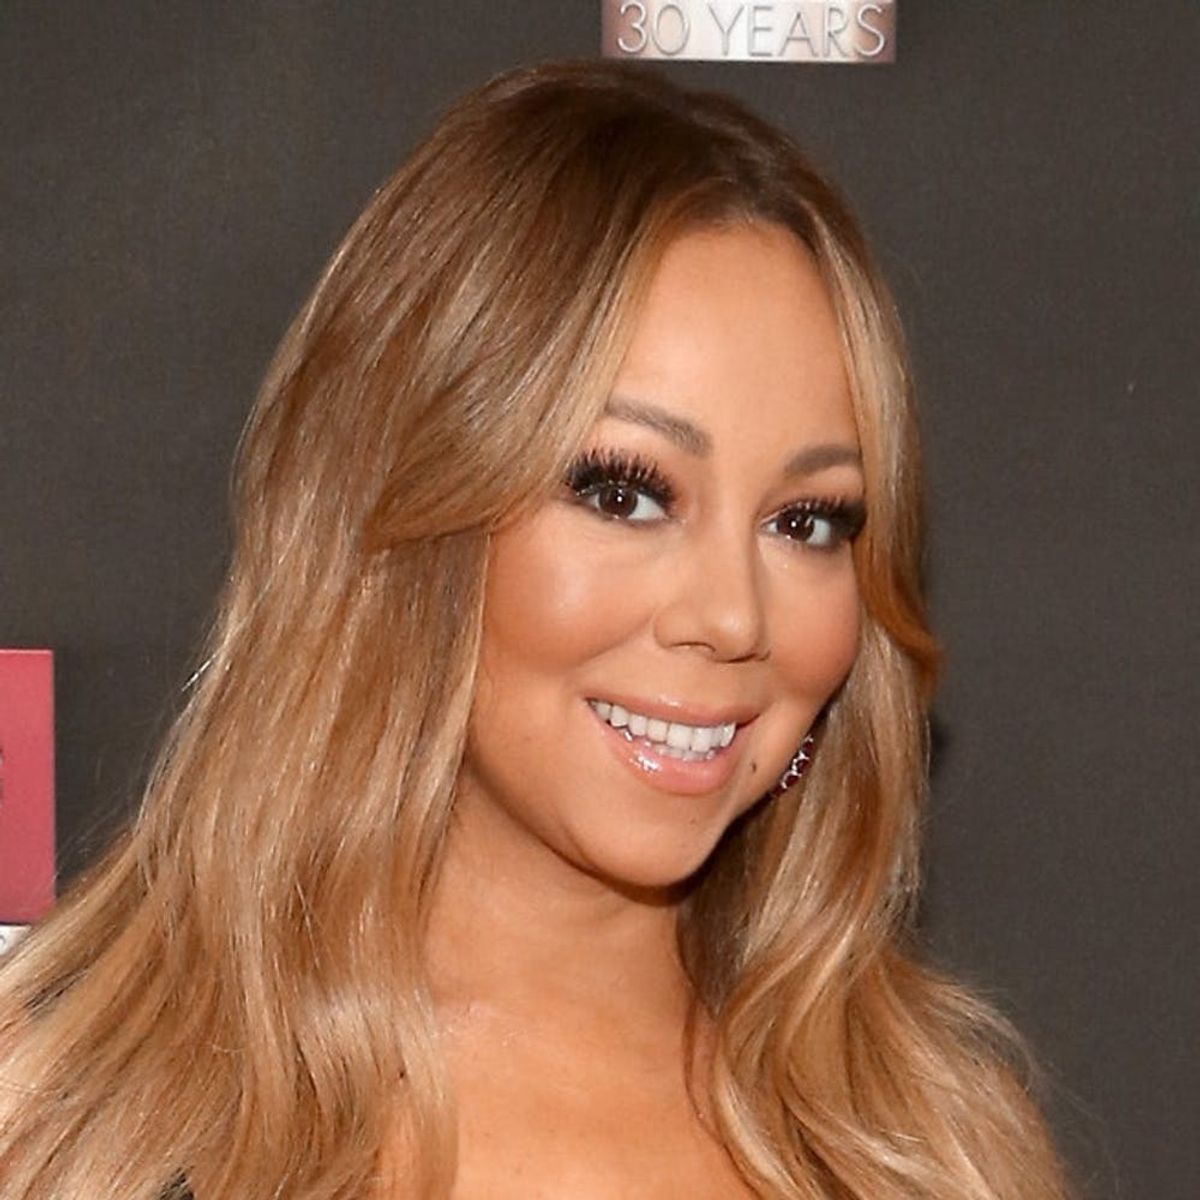 Mariah Carey Just Singlehandedly Cancelled Brunch Forever With a Single Tweet